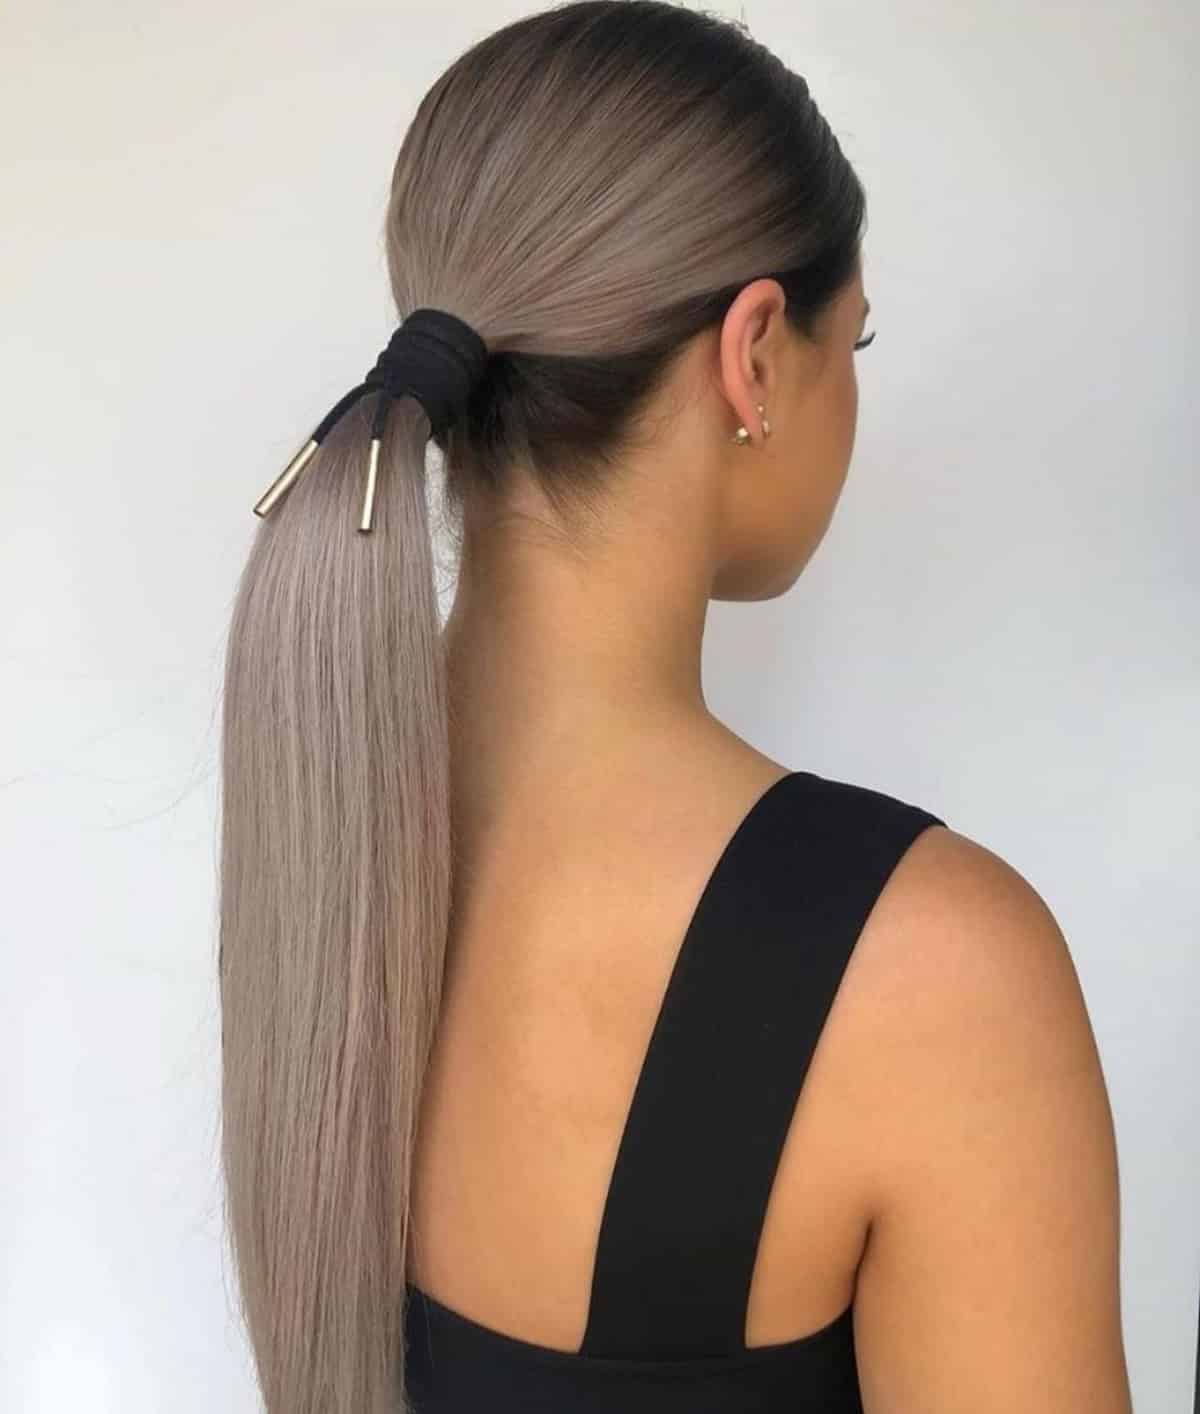 43 Easy Haircuts and Hairstyles for Long Straight Hair in 2023